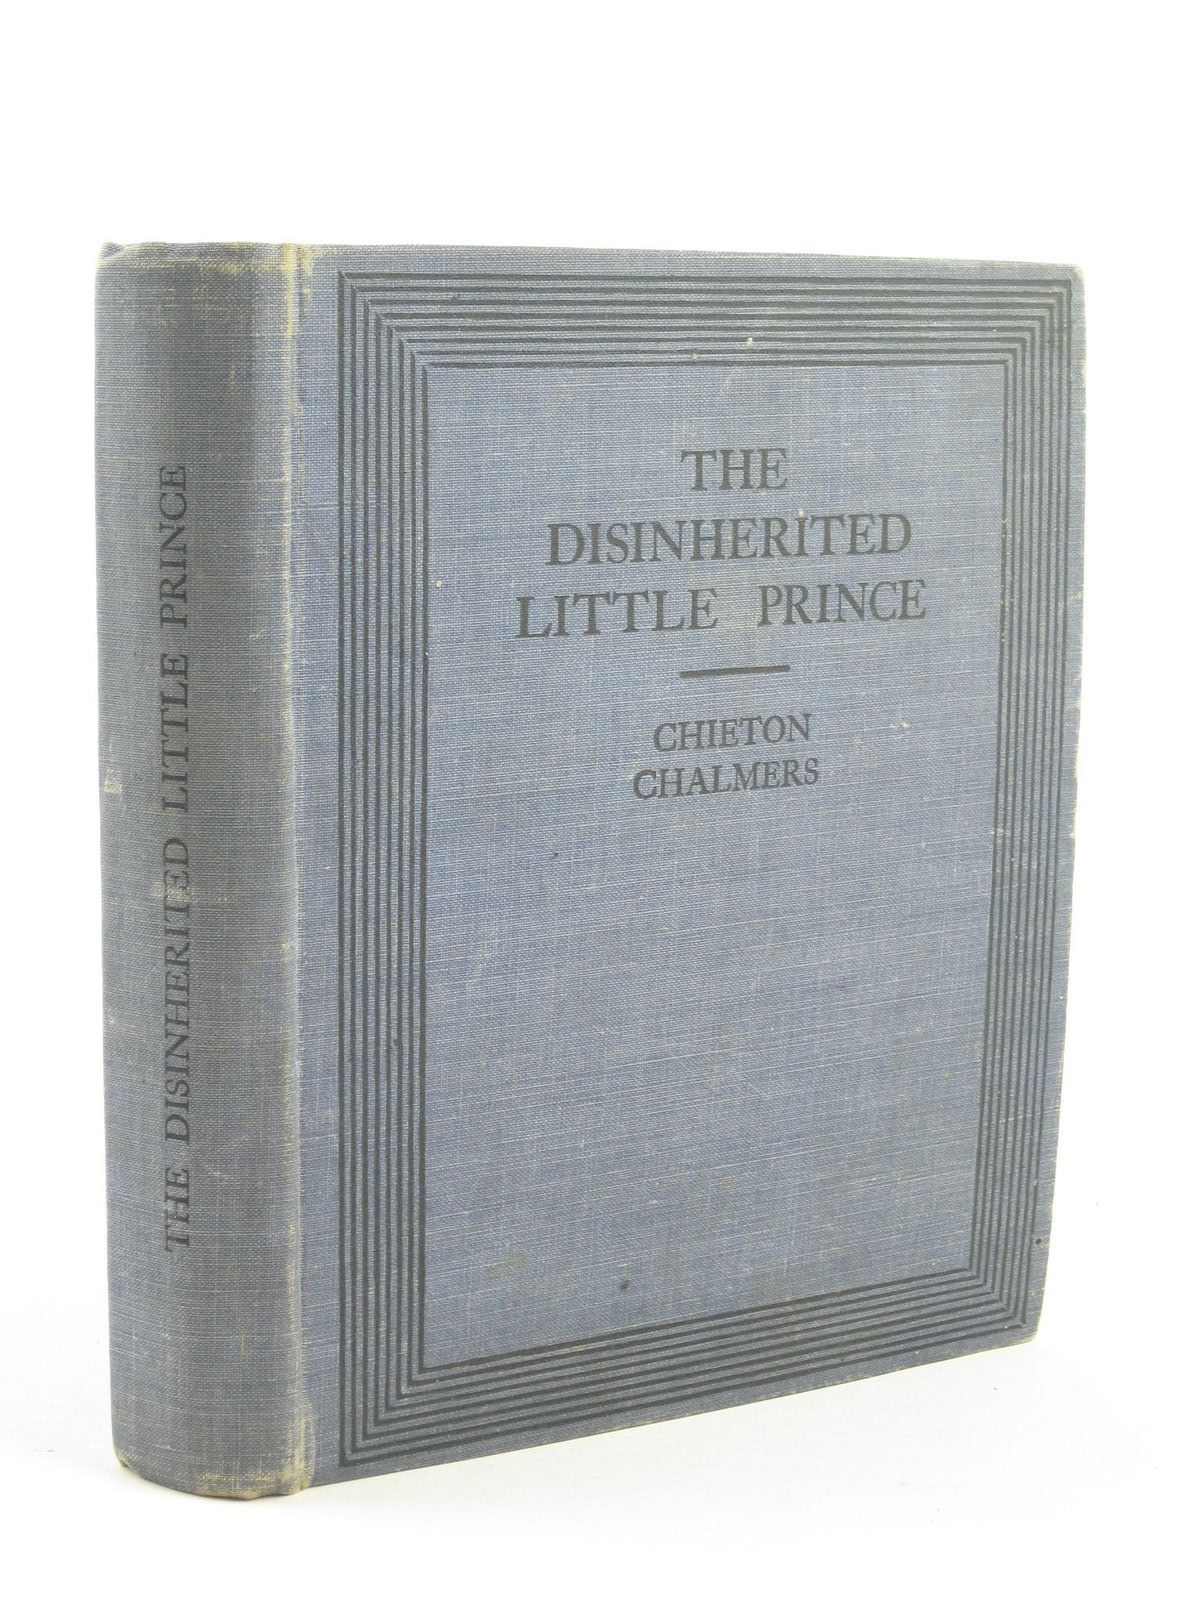 Photo of THE DISINHERITED LITTLE PRINCE written by Chalmers, Chieton published by Wells Gardner, Darton & Co. Ltd. (STOCK CODE: 1501548)  for sale by Stella & Rose's Books